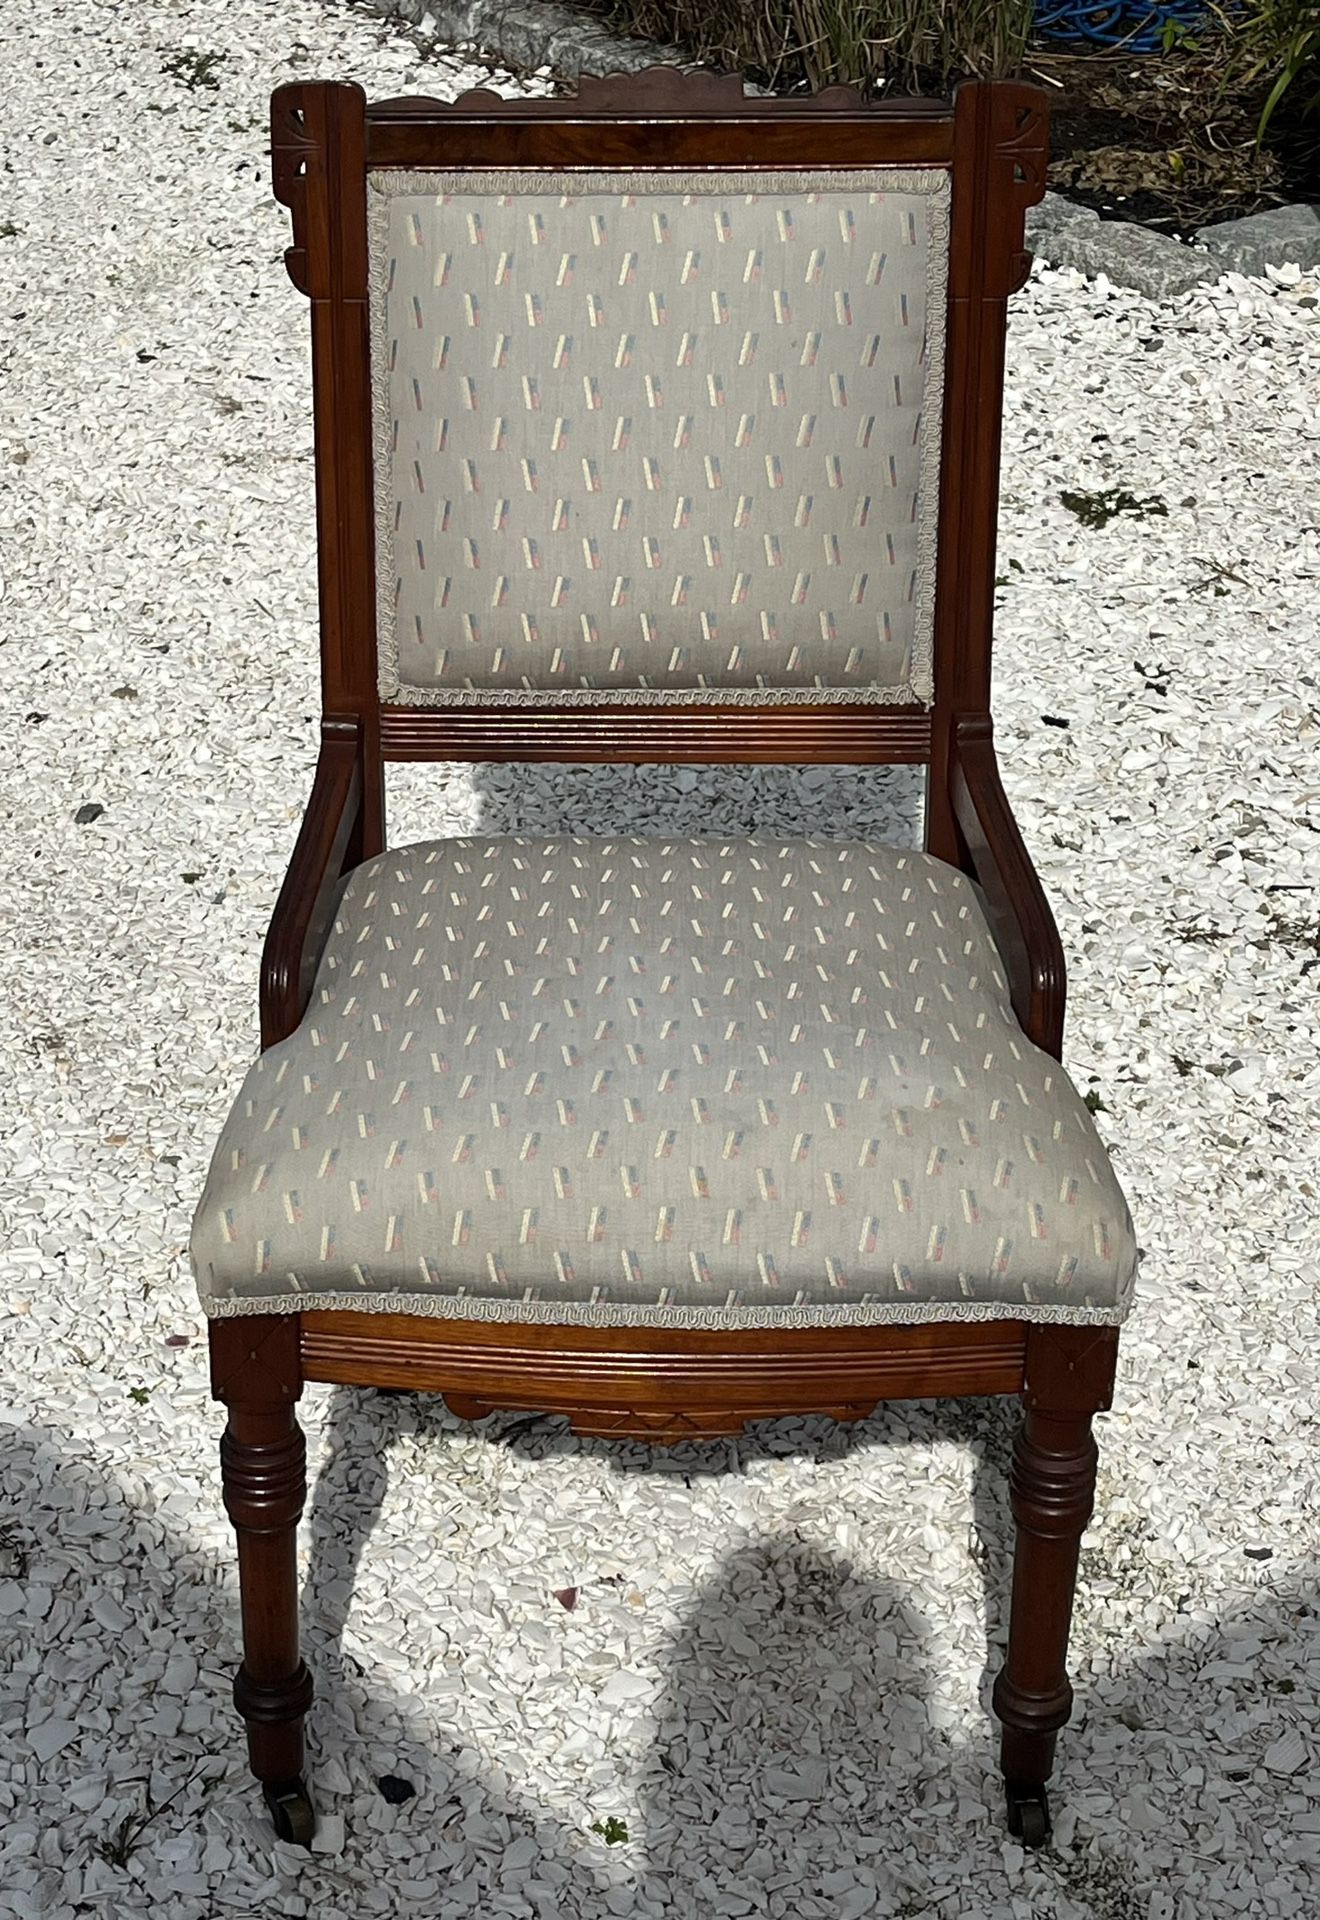 Antique Victorian chairs